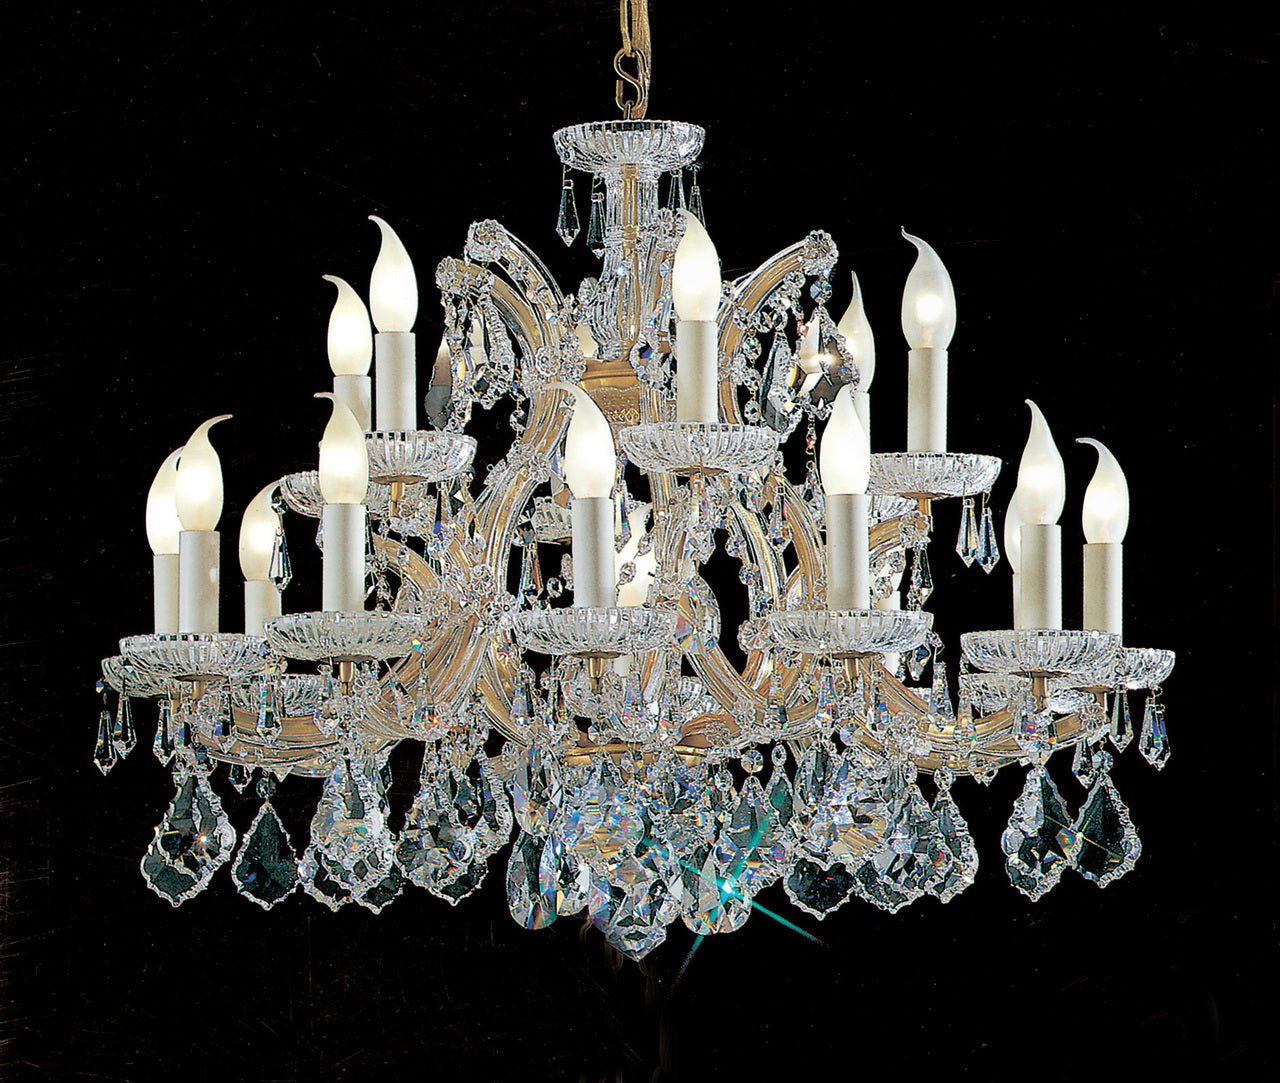 Classic Lighting 8116 OWG S Maria Theresa Traditional Crystal Chandelier in Olde World Gold (Imported from Italy)